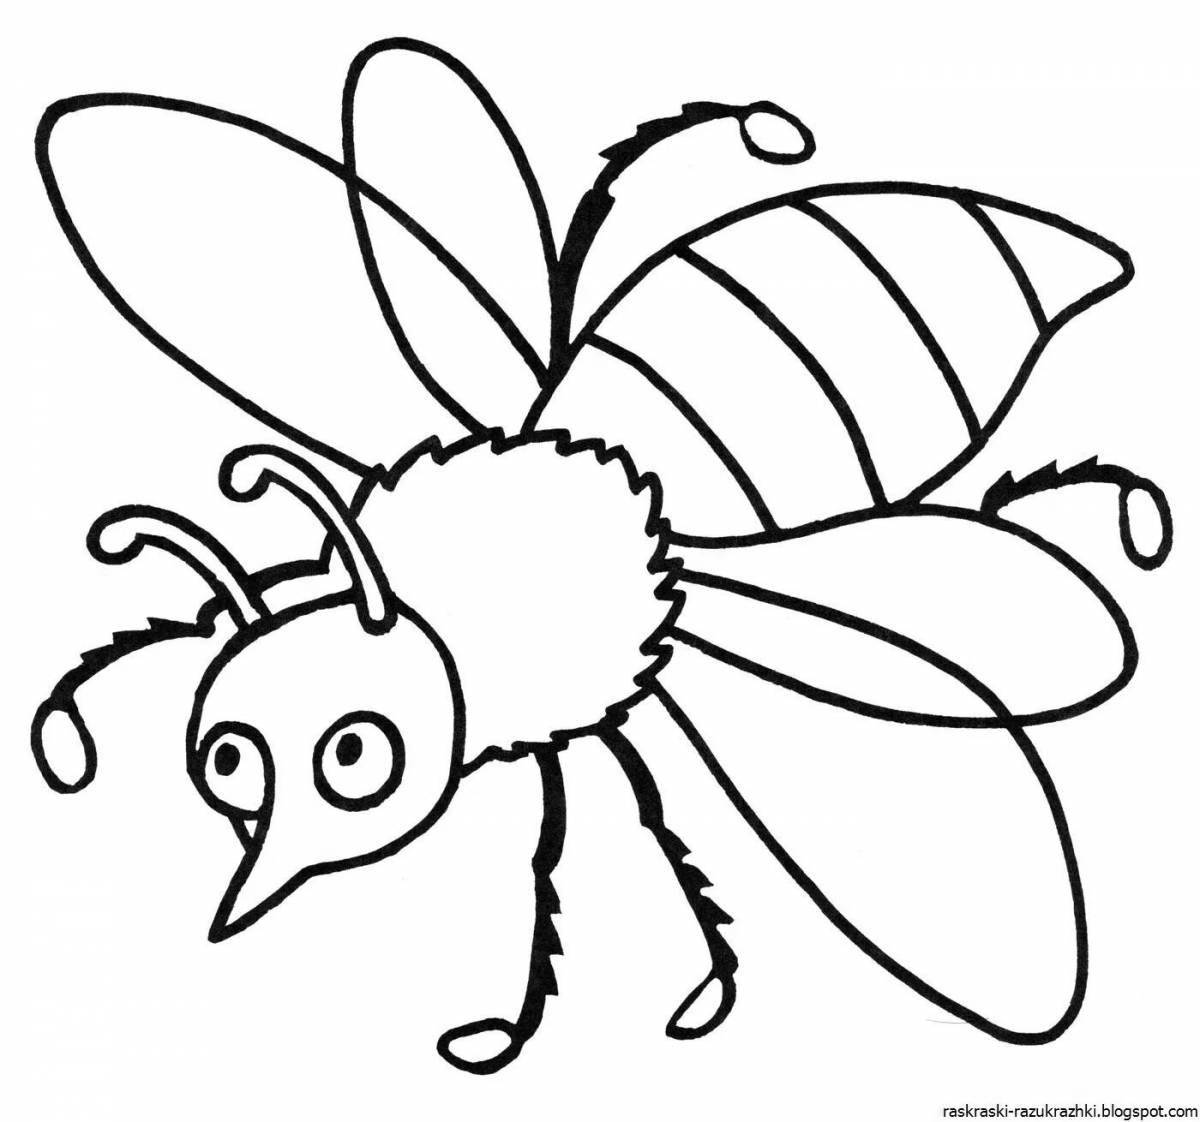 Insect coloring pages for kids 5-6 years old